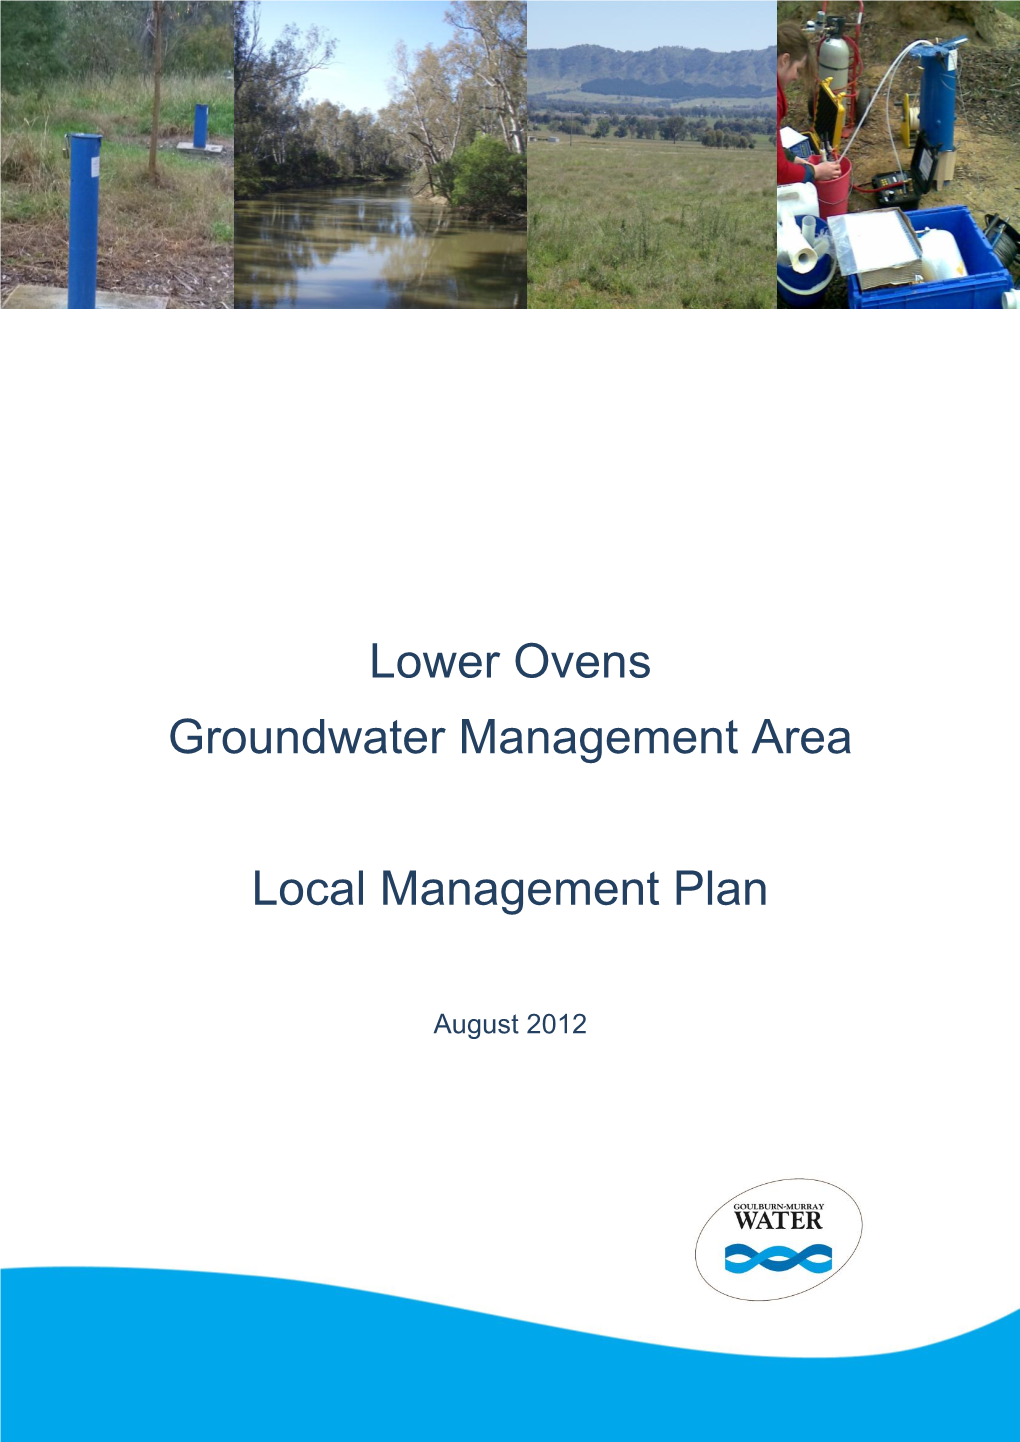 Lower Ovens GMA Local Management Plan